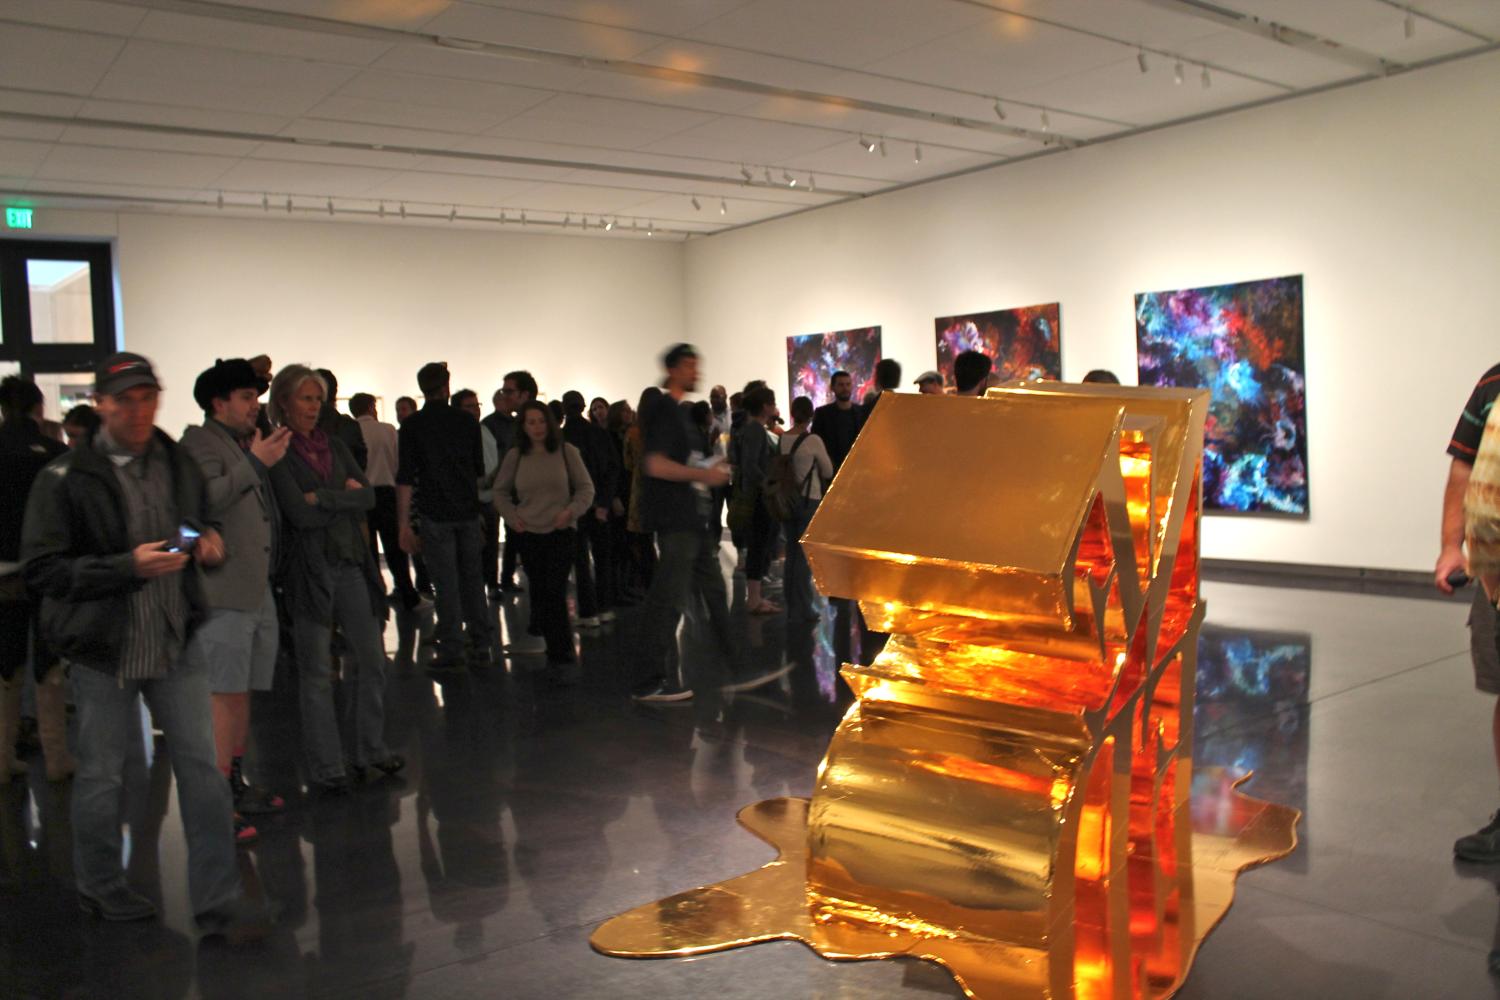 A crowd mingles in the gallery with a large gold sculpture in the foreground.